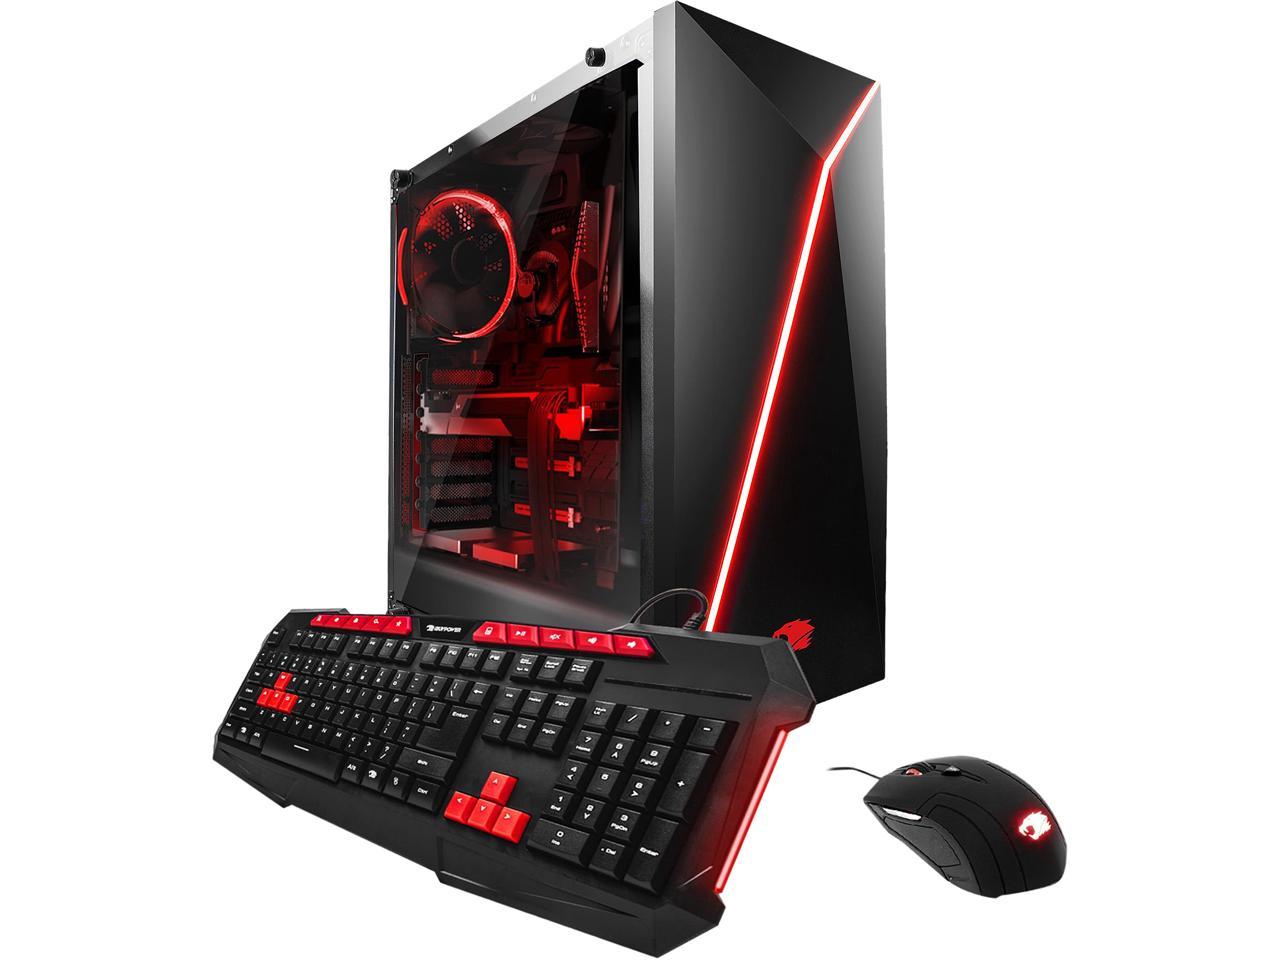 Curved Ibuypower Gaming Pc Troubleshooting for Streaming